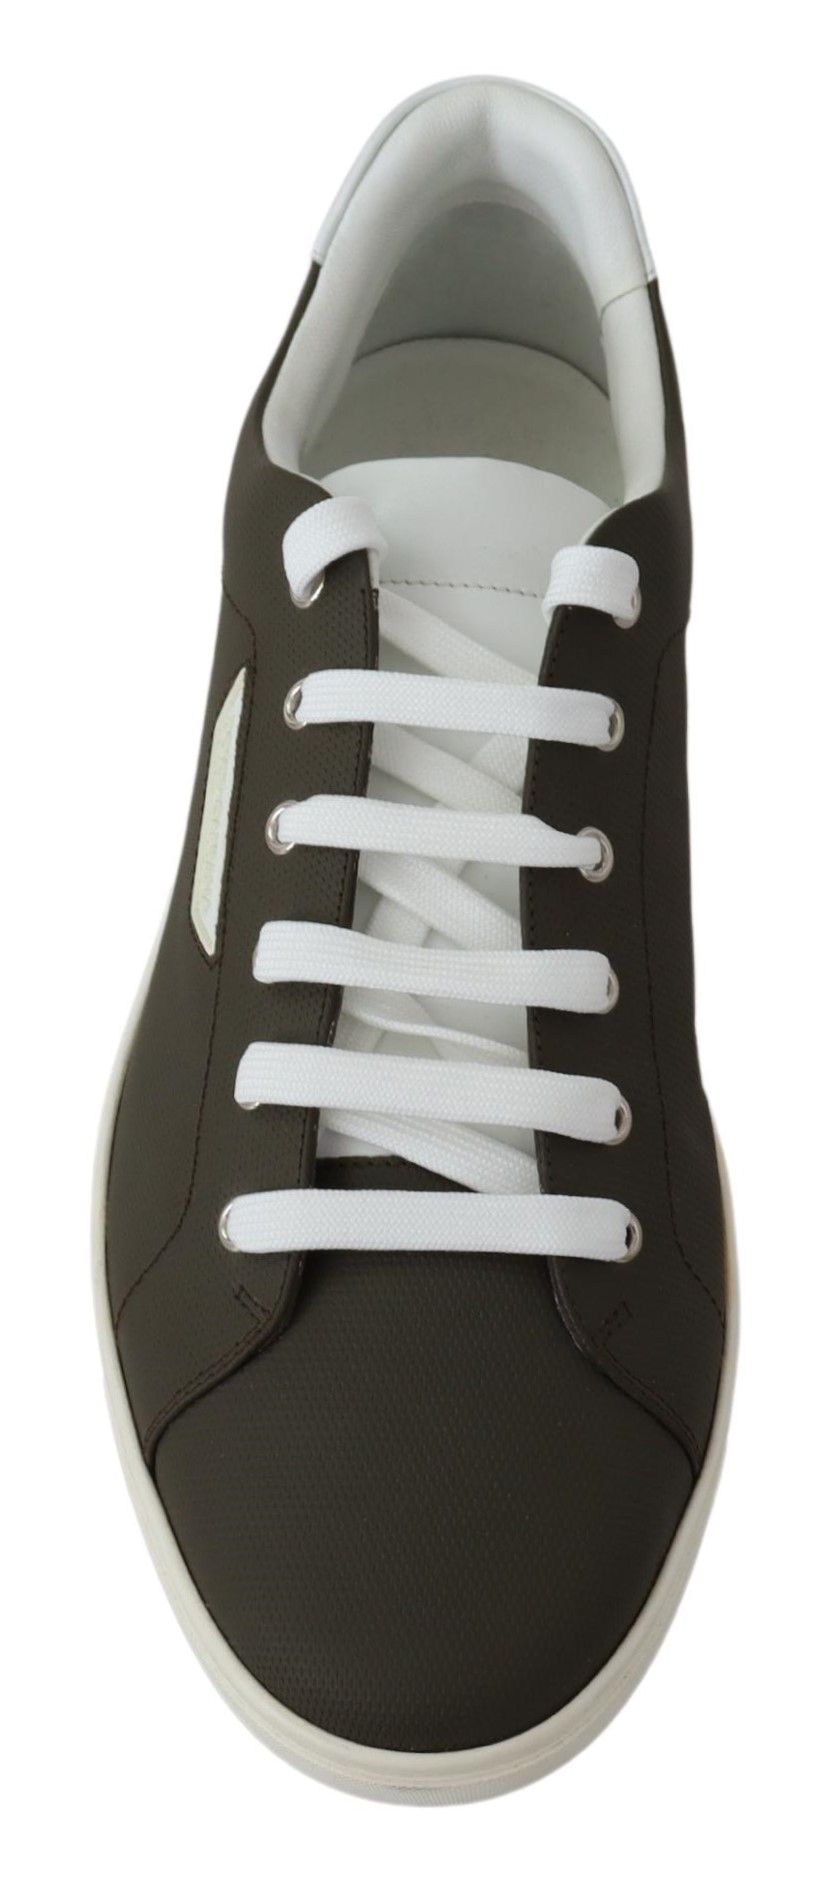 Dolce & Gabbana White Green Leather Low Top Sneakers Shoes | Fashionsarah.com